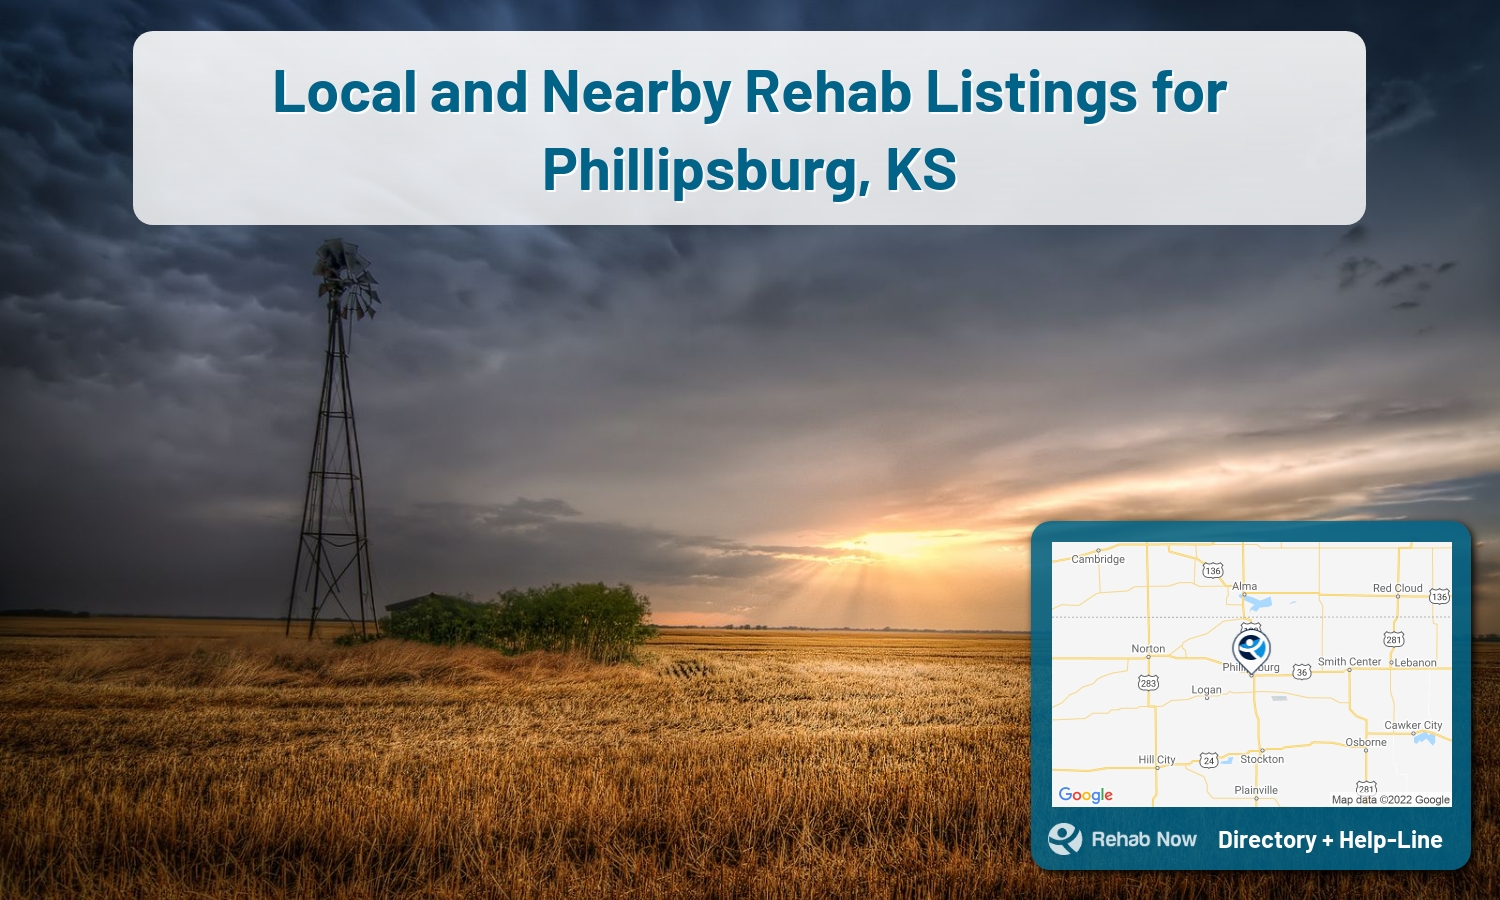 View options, availability, treatment methods, and more, for drug rehab and alcohol treatment in Phillipsburg, Kansas